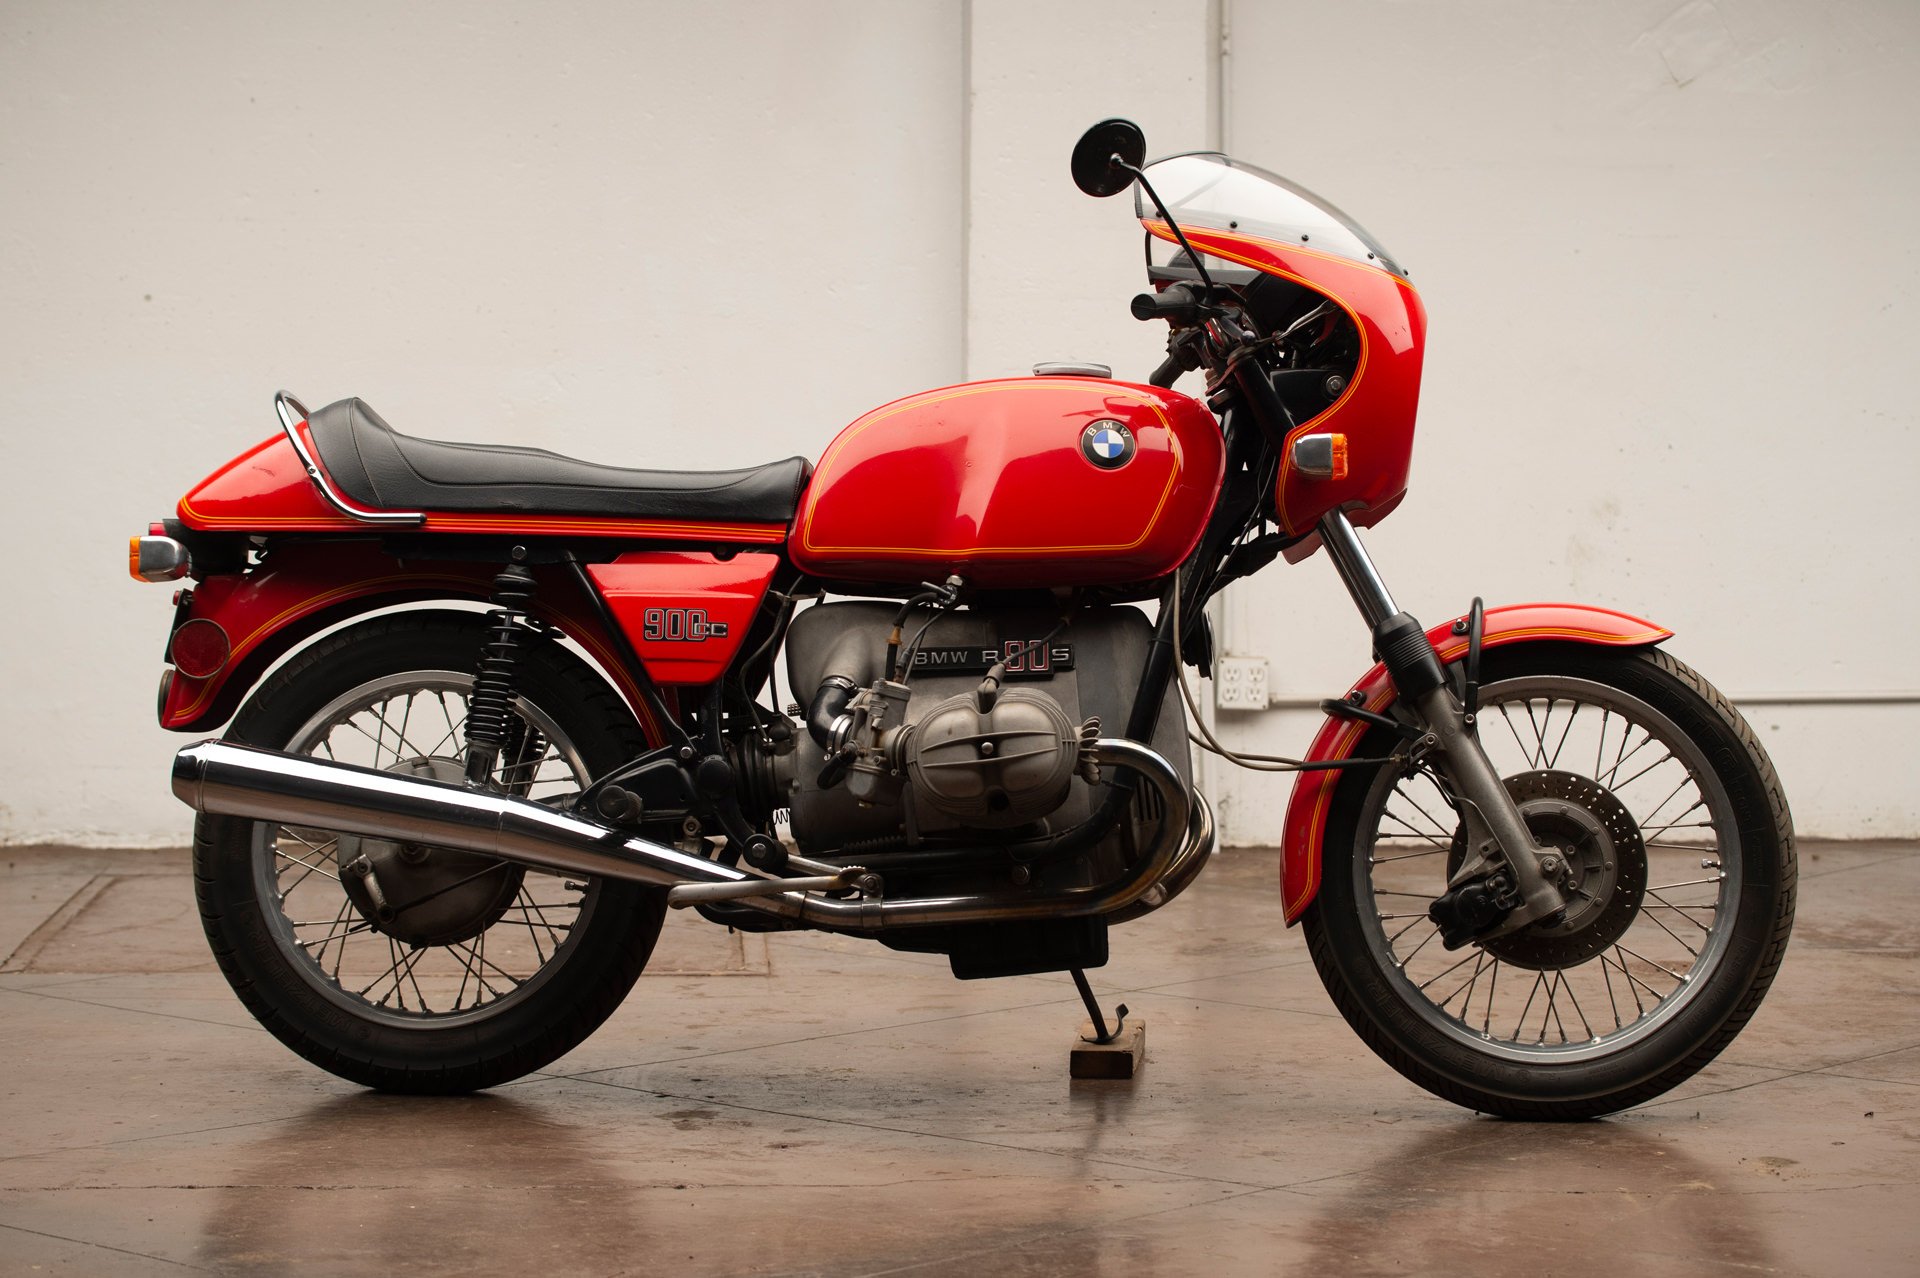 The BMW R90S - The Motorcycle That Launched BMW Into The Modern Age